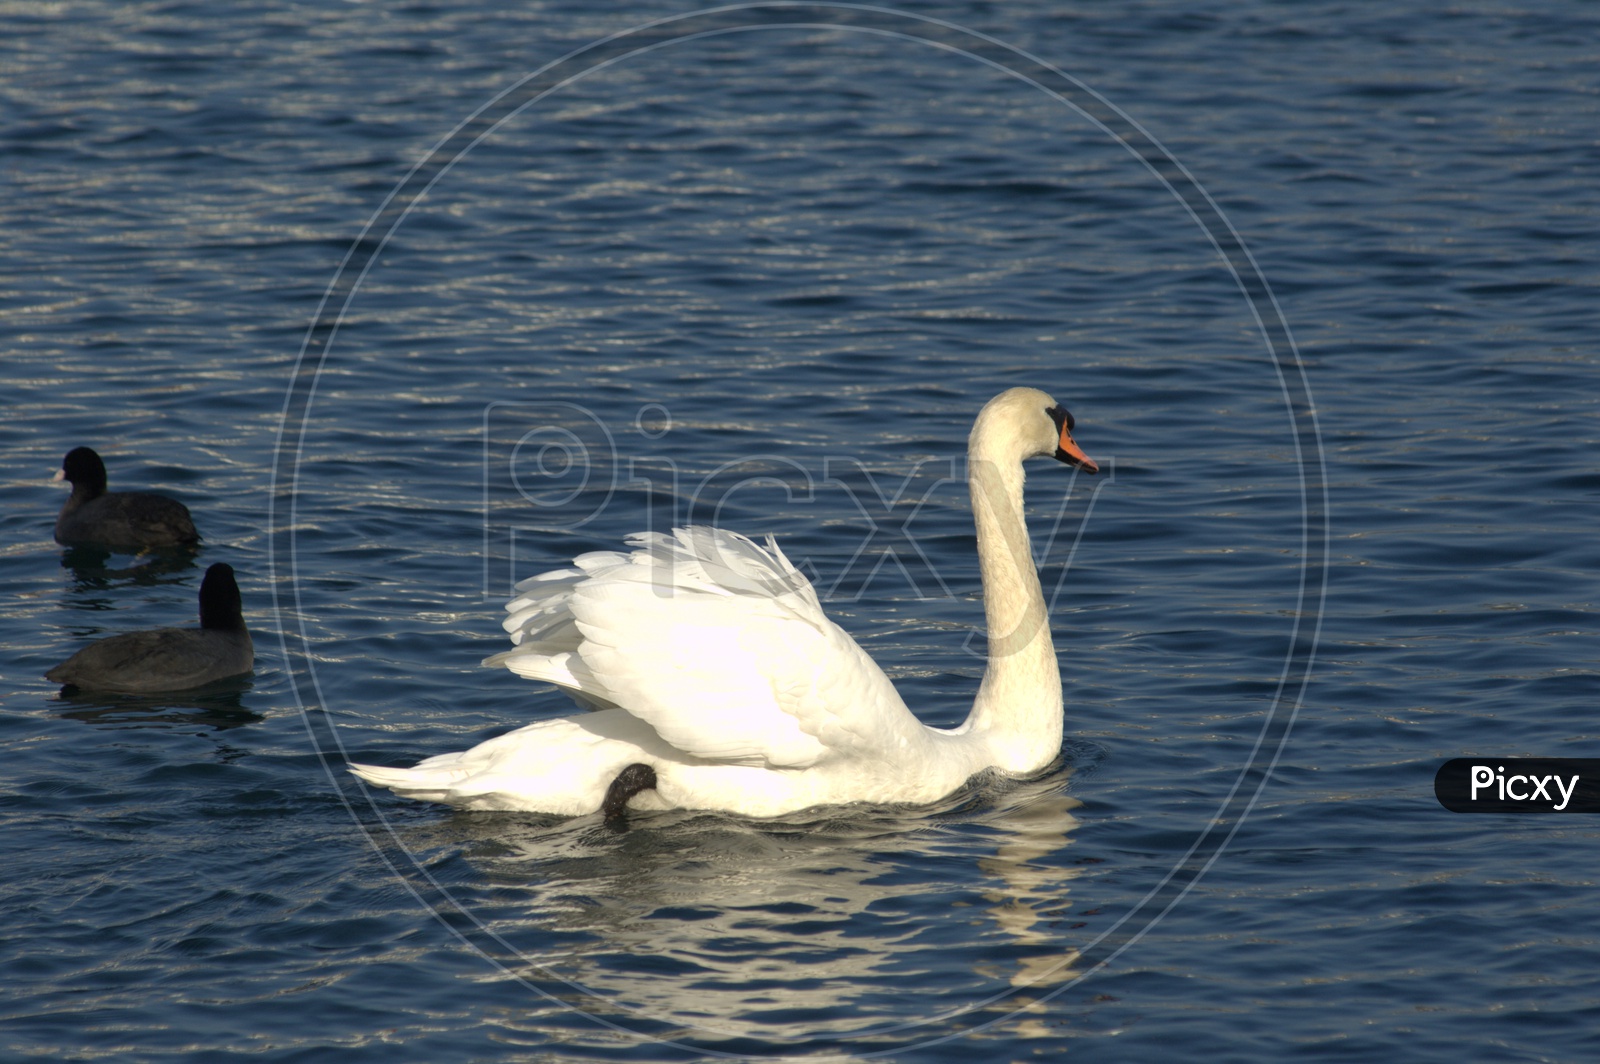 A Tundra Swan moving along on the pond water